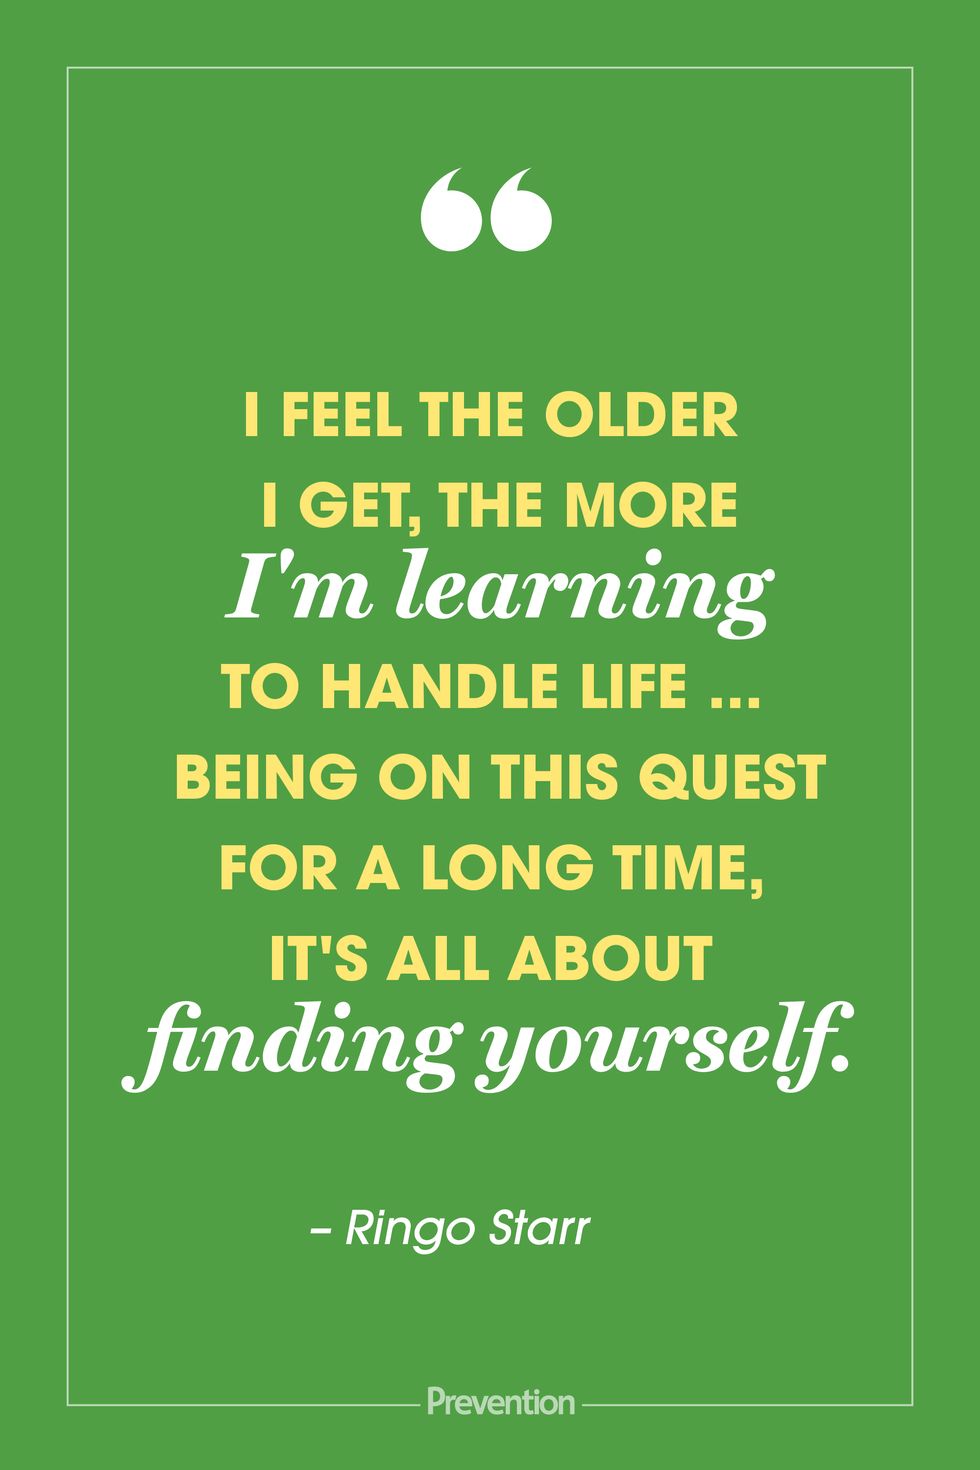 Quotes That Make You Feel Better about Getting Older